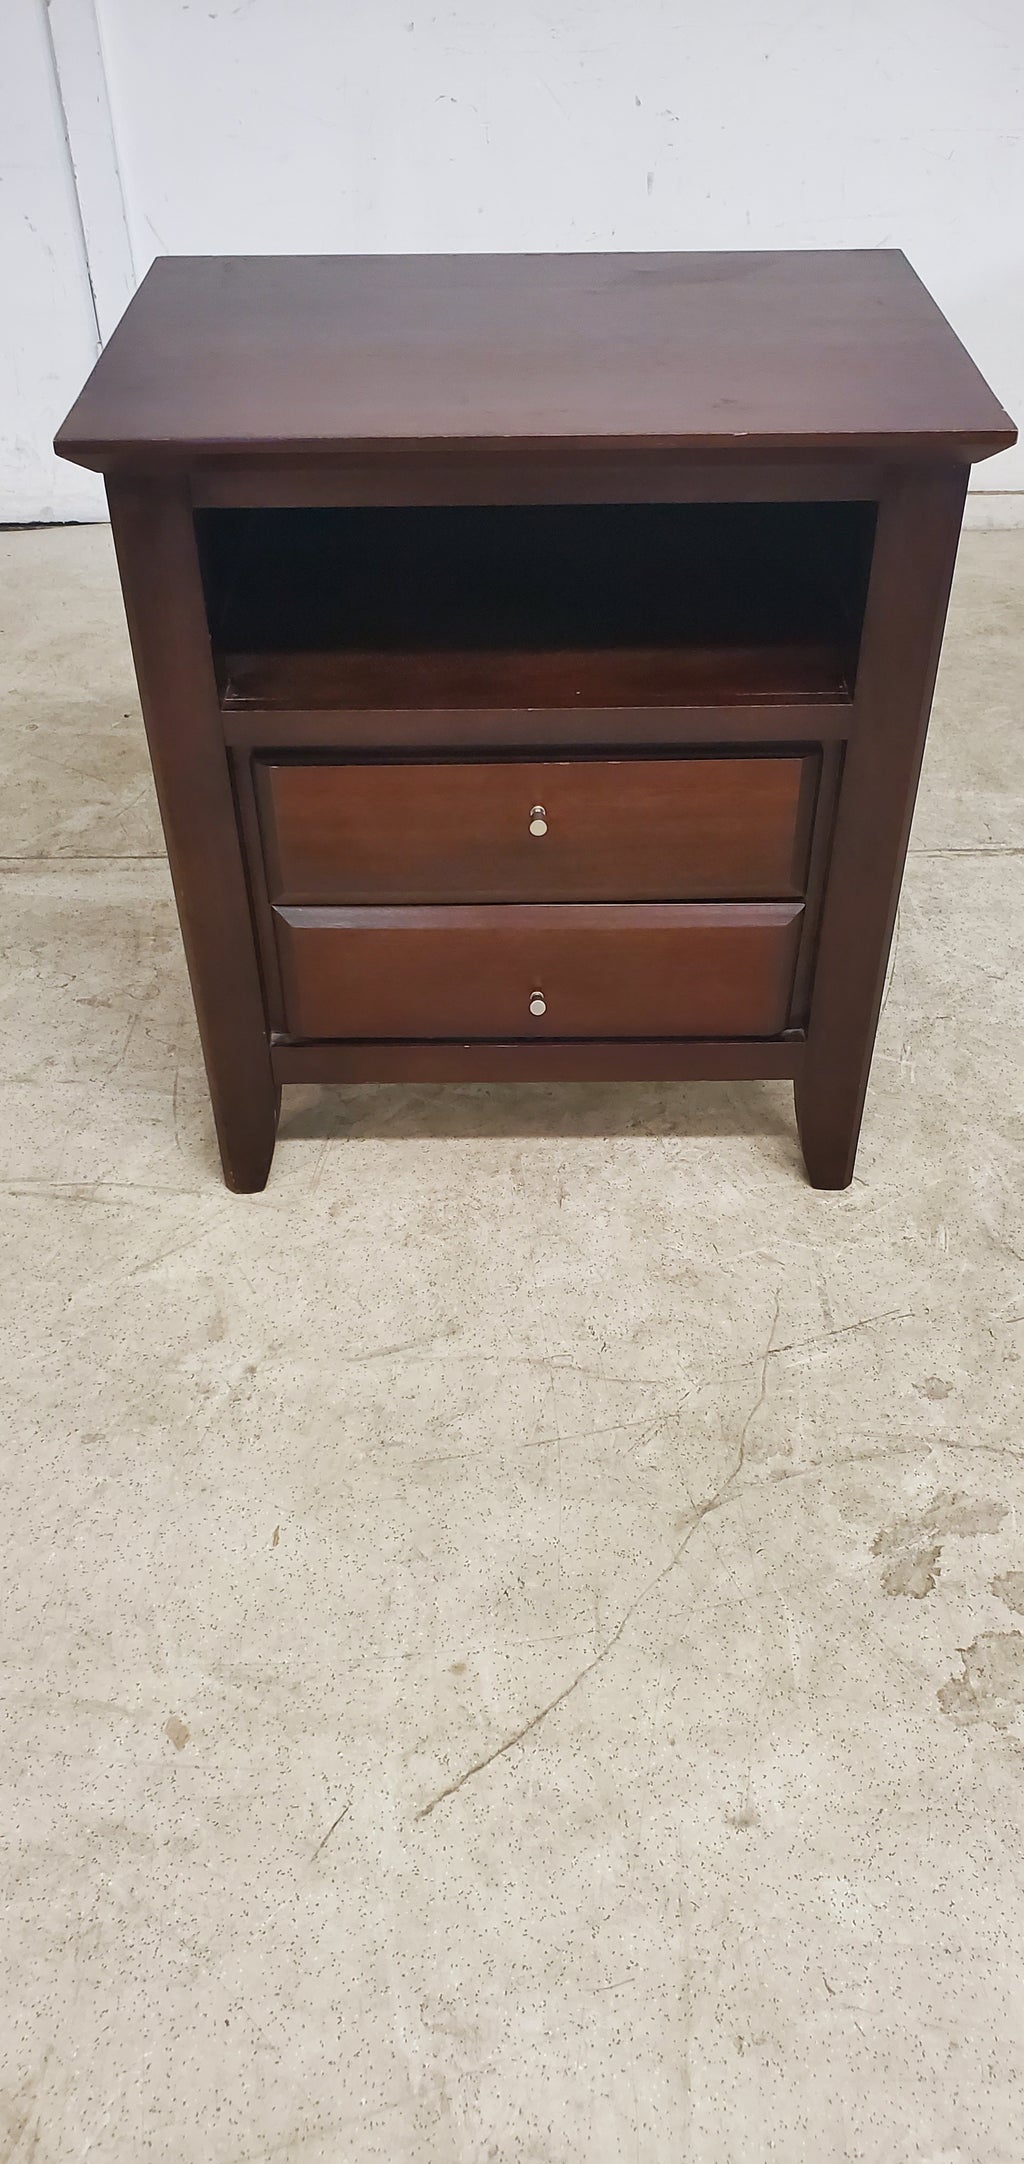 26''W Wooden Nightstand with 2 Drawers